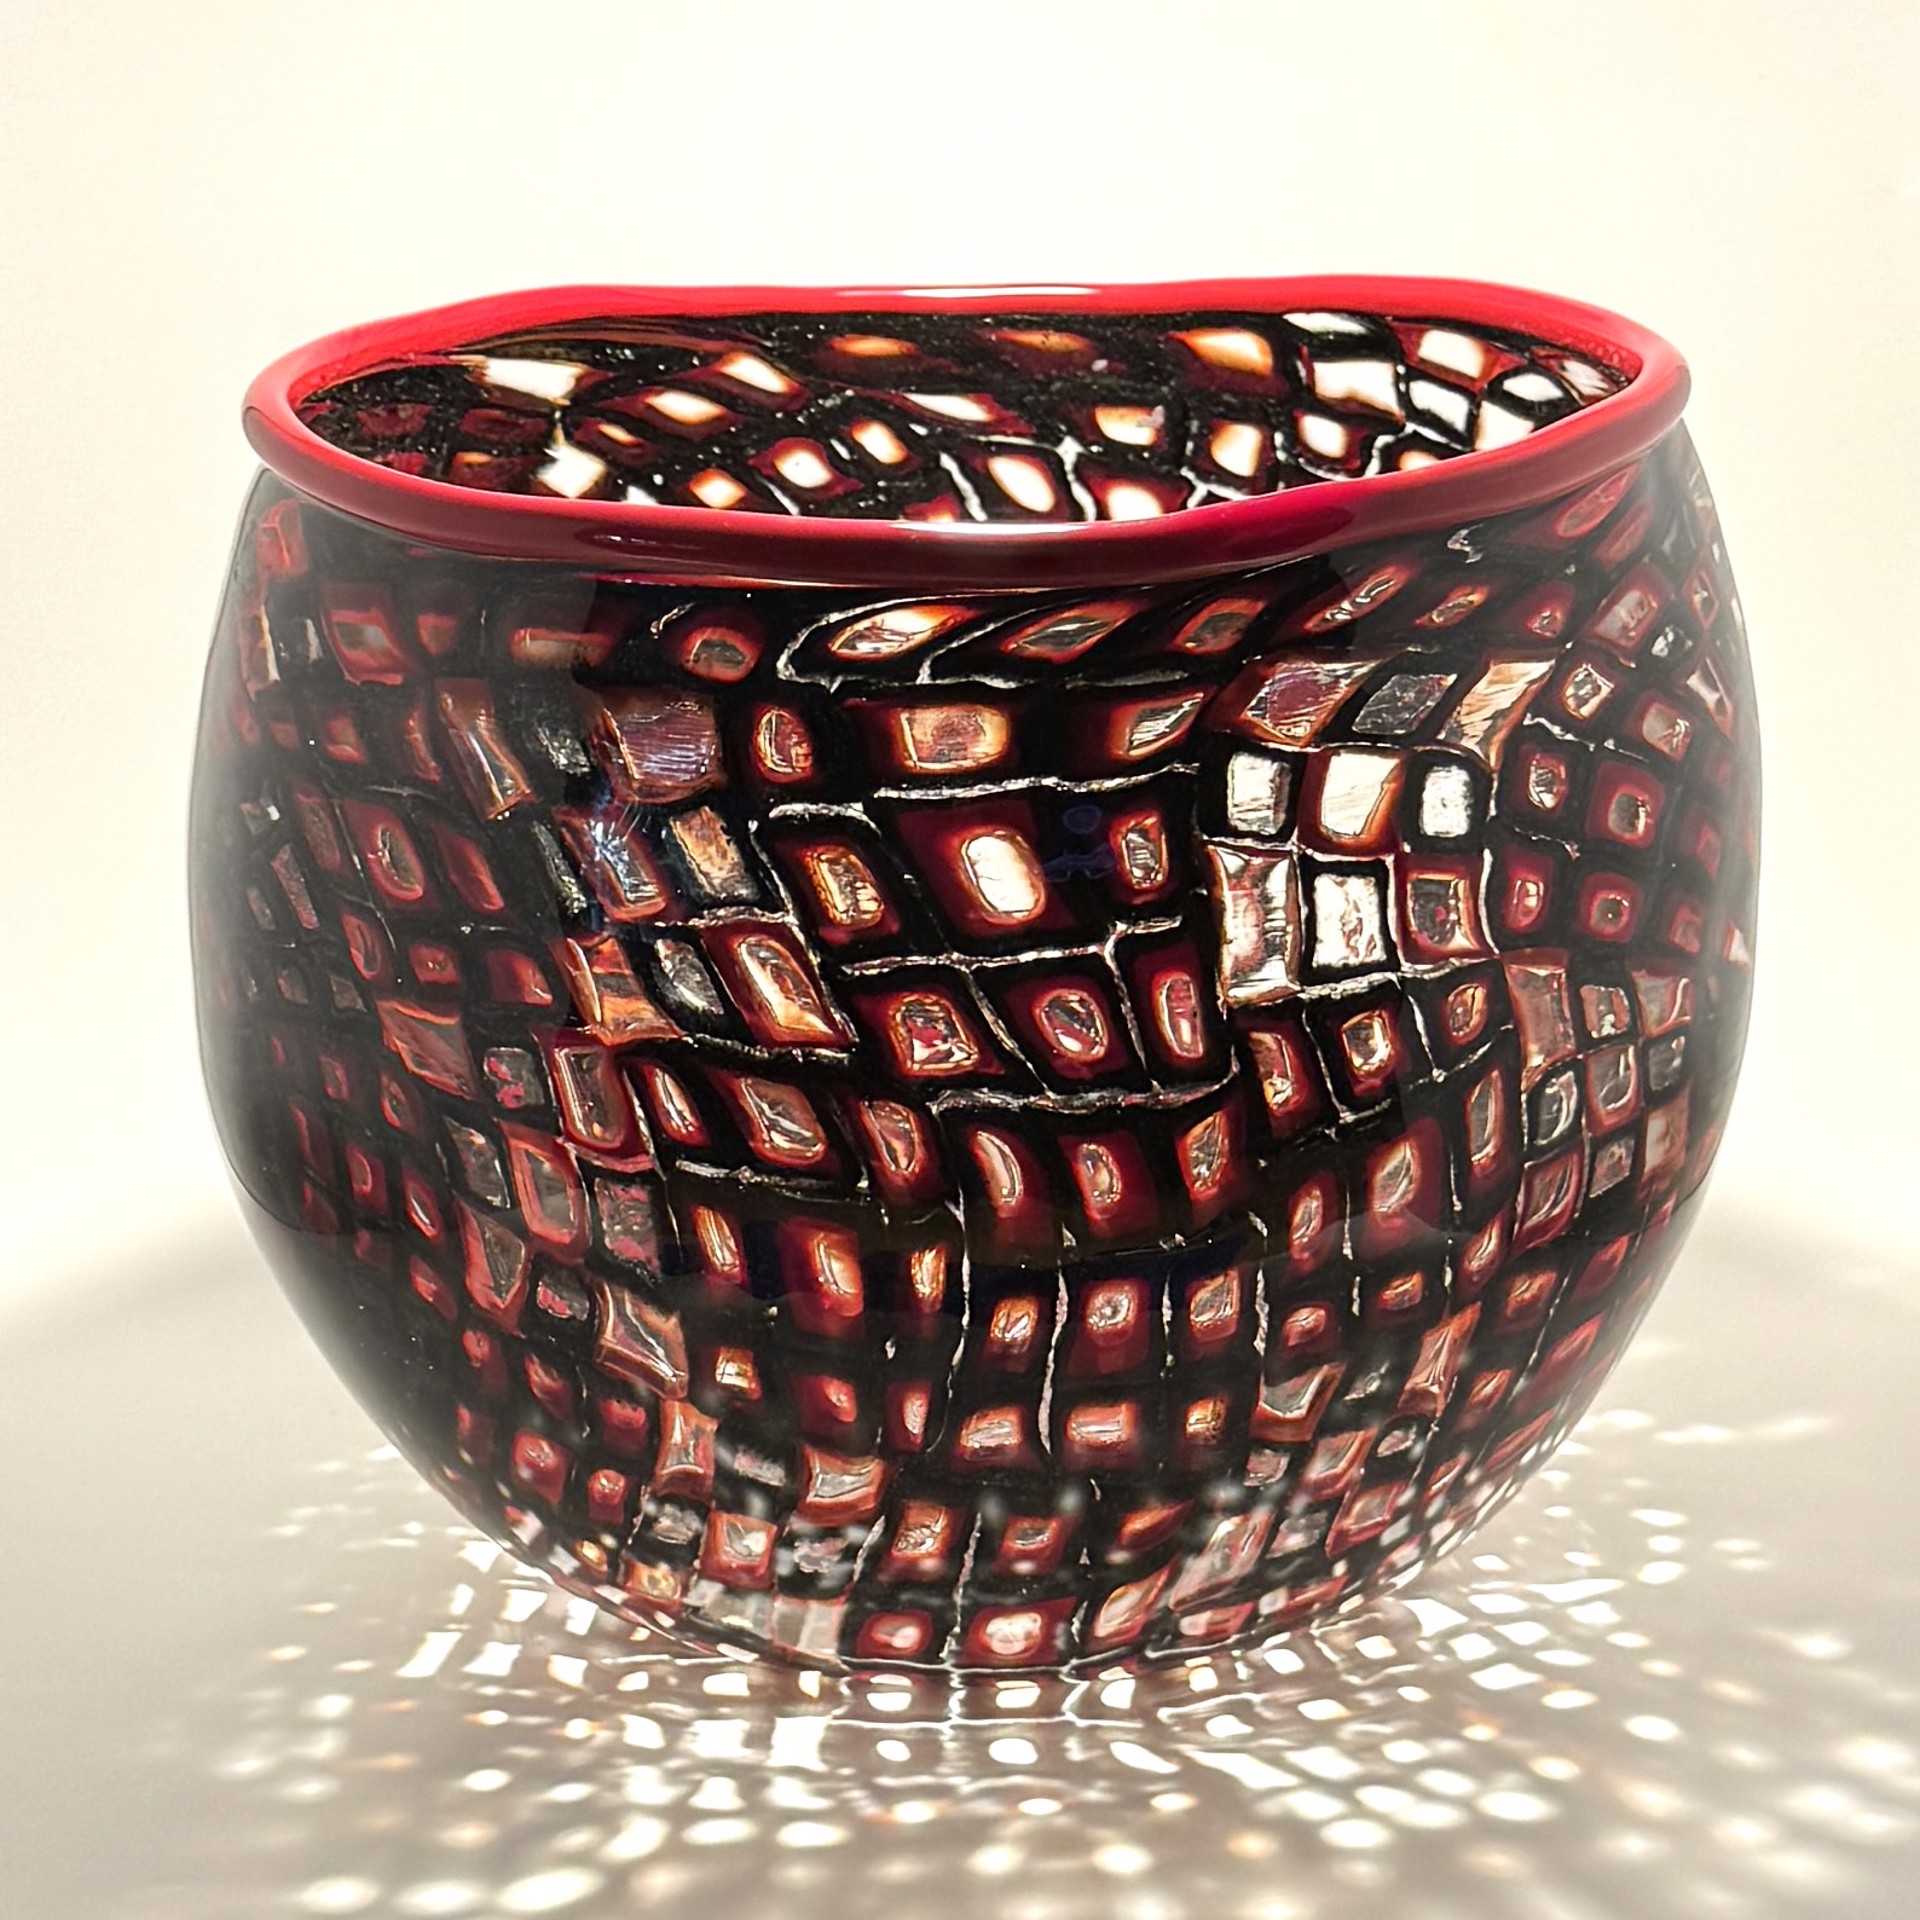 Black and Red Squares Bowl JG23-4 by John Glass